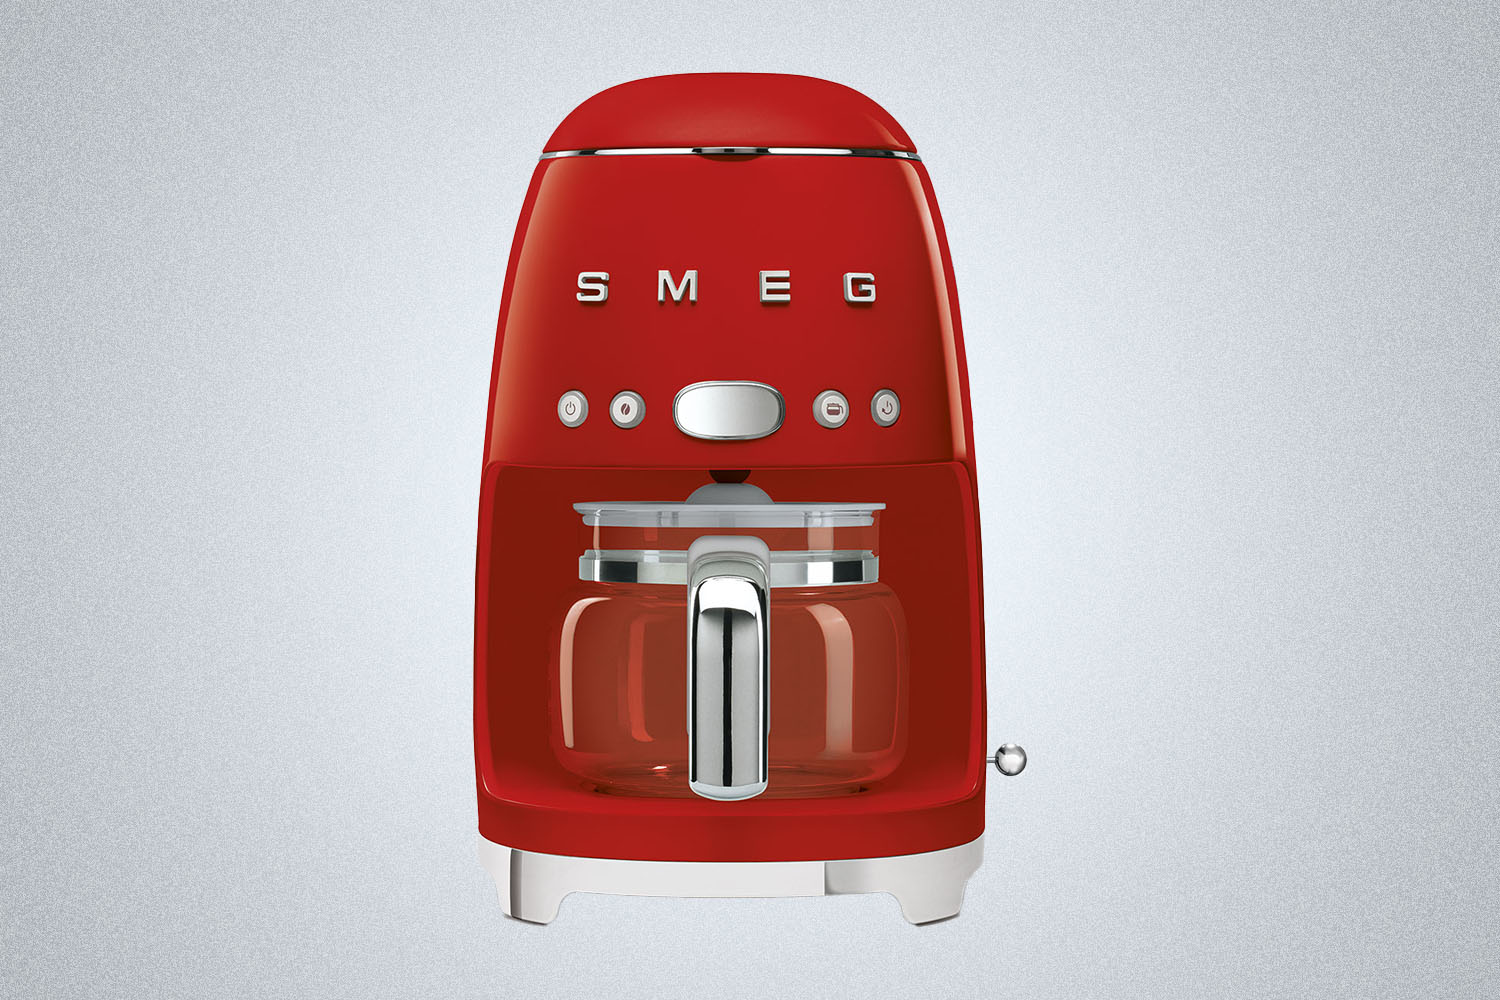 A red Smeg Drip Filter Coffee Machine on a gray background